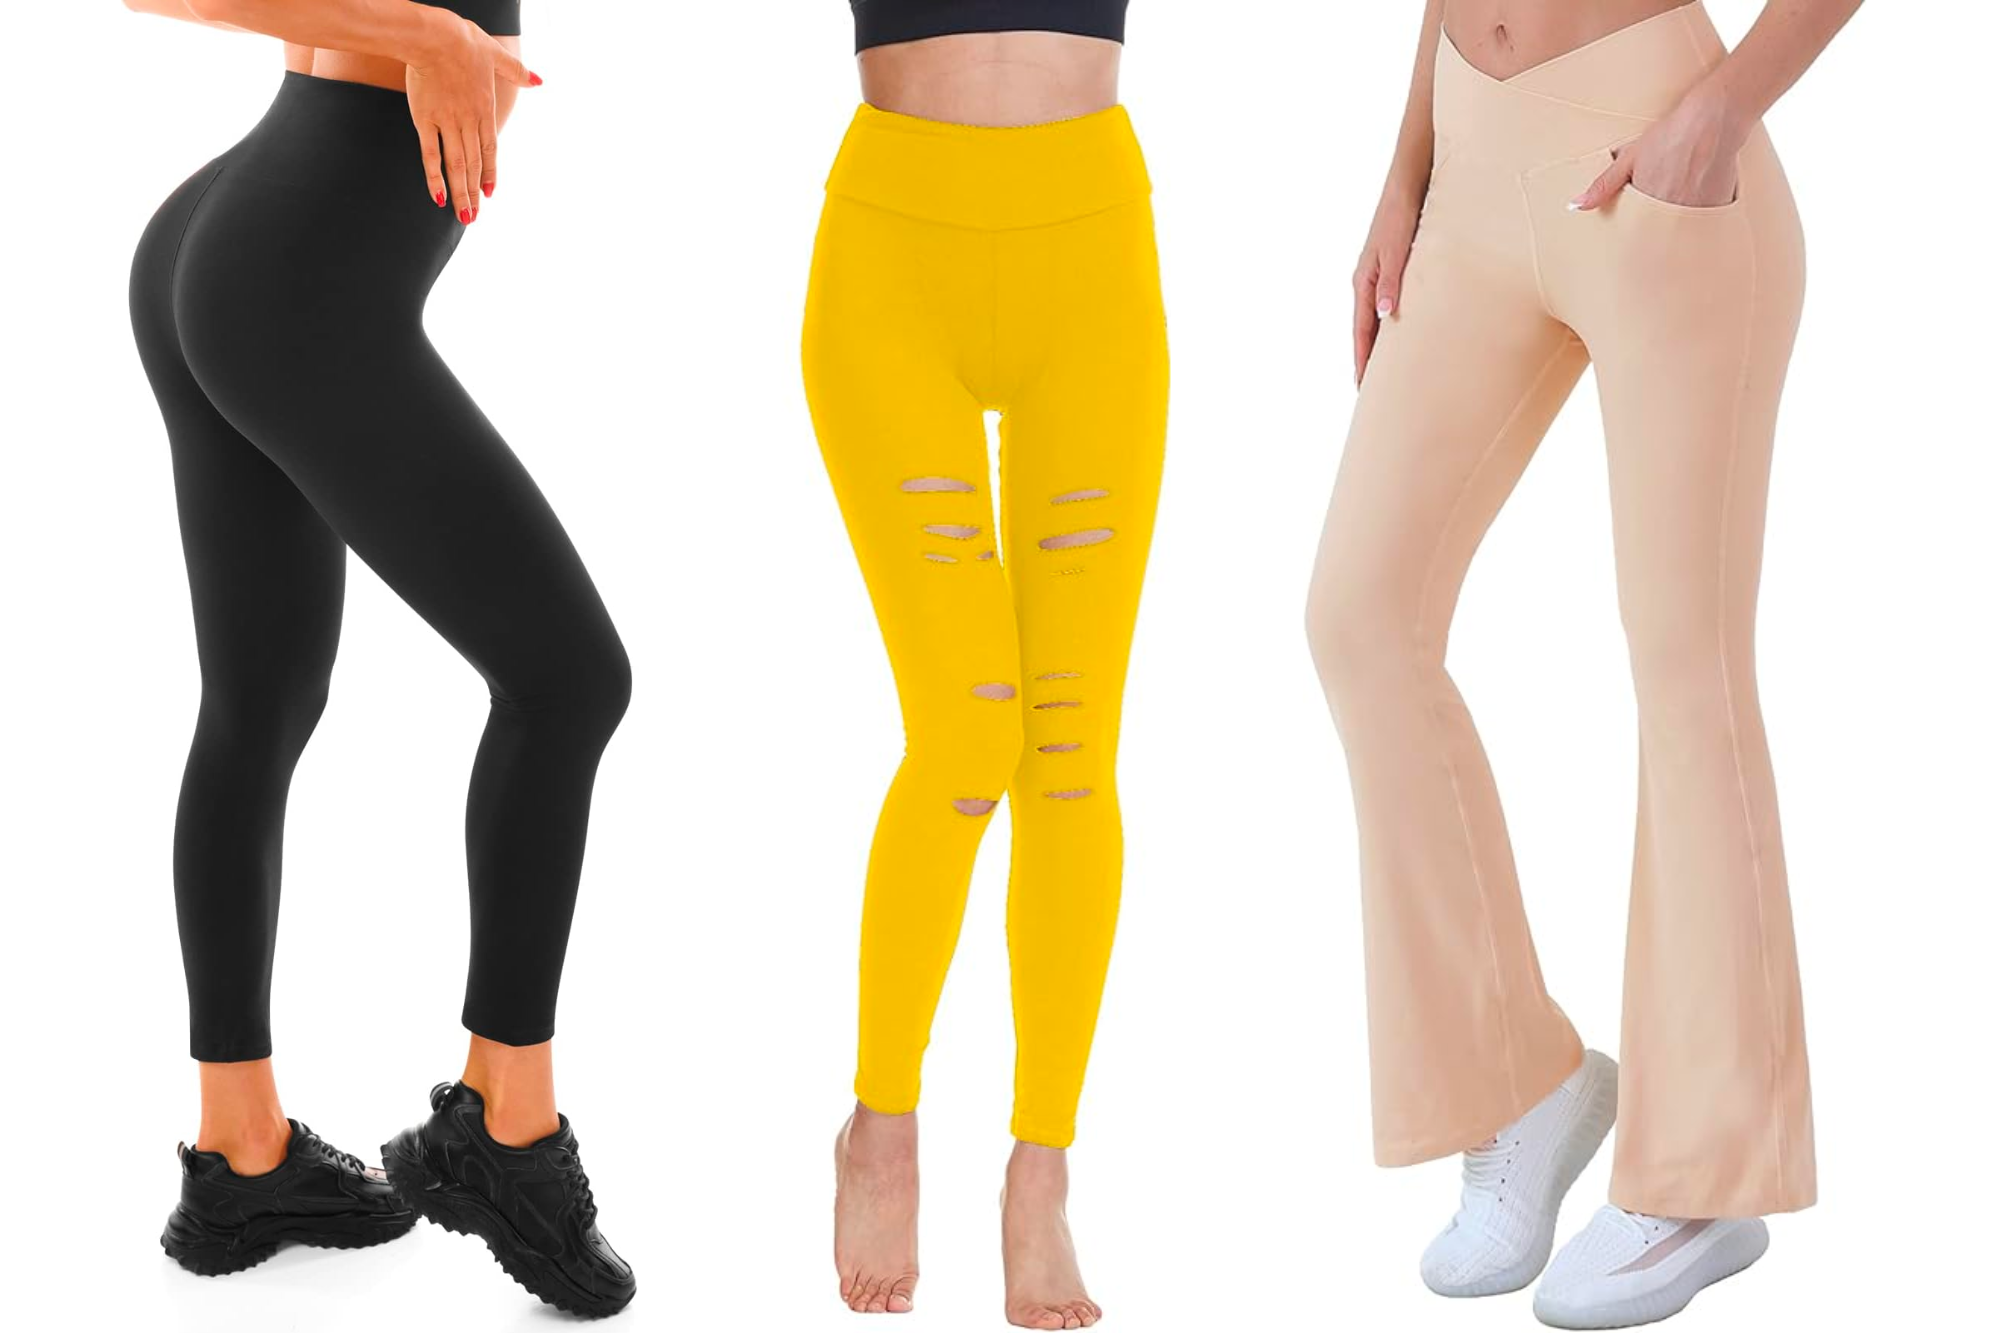 17 of the Best Leggings Under $9 You Can Stock Up on Right Now